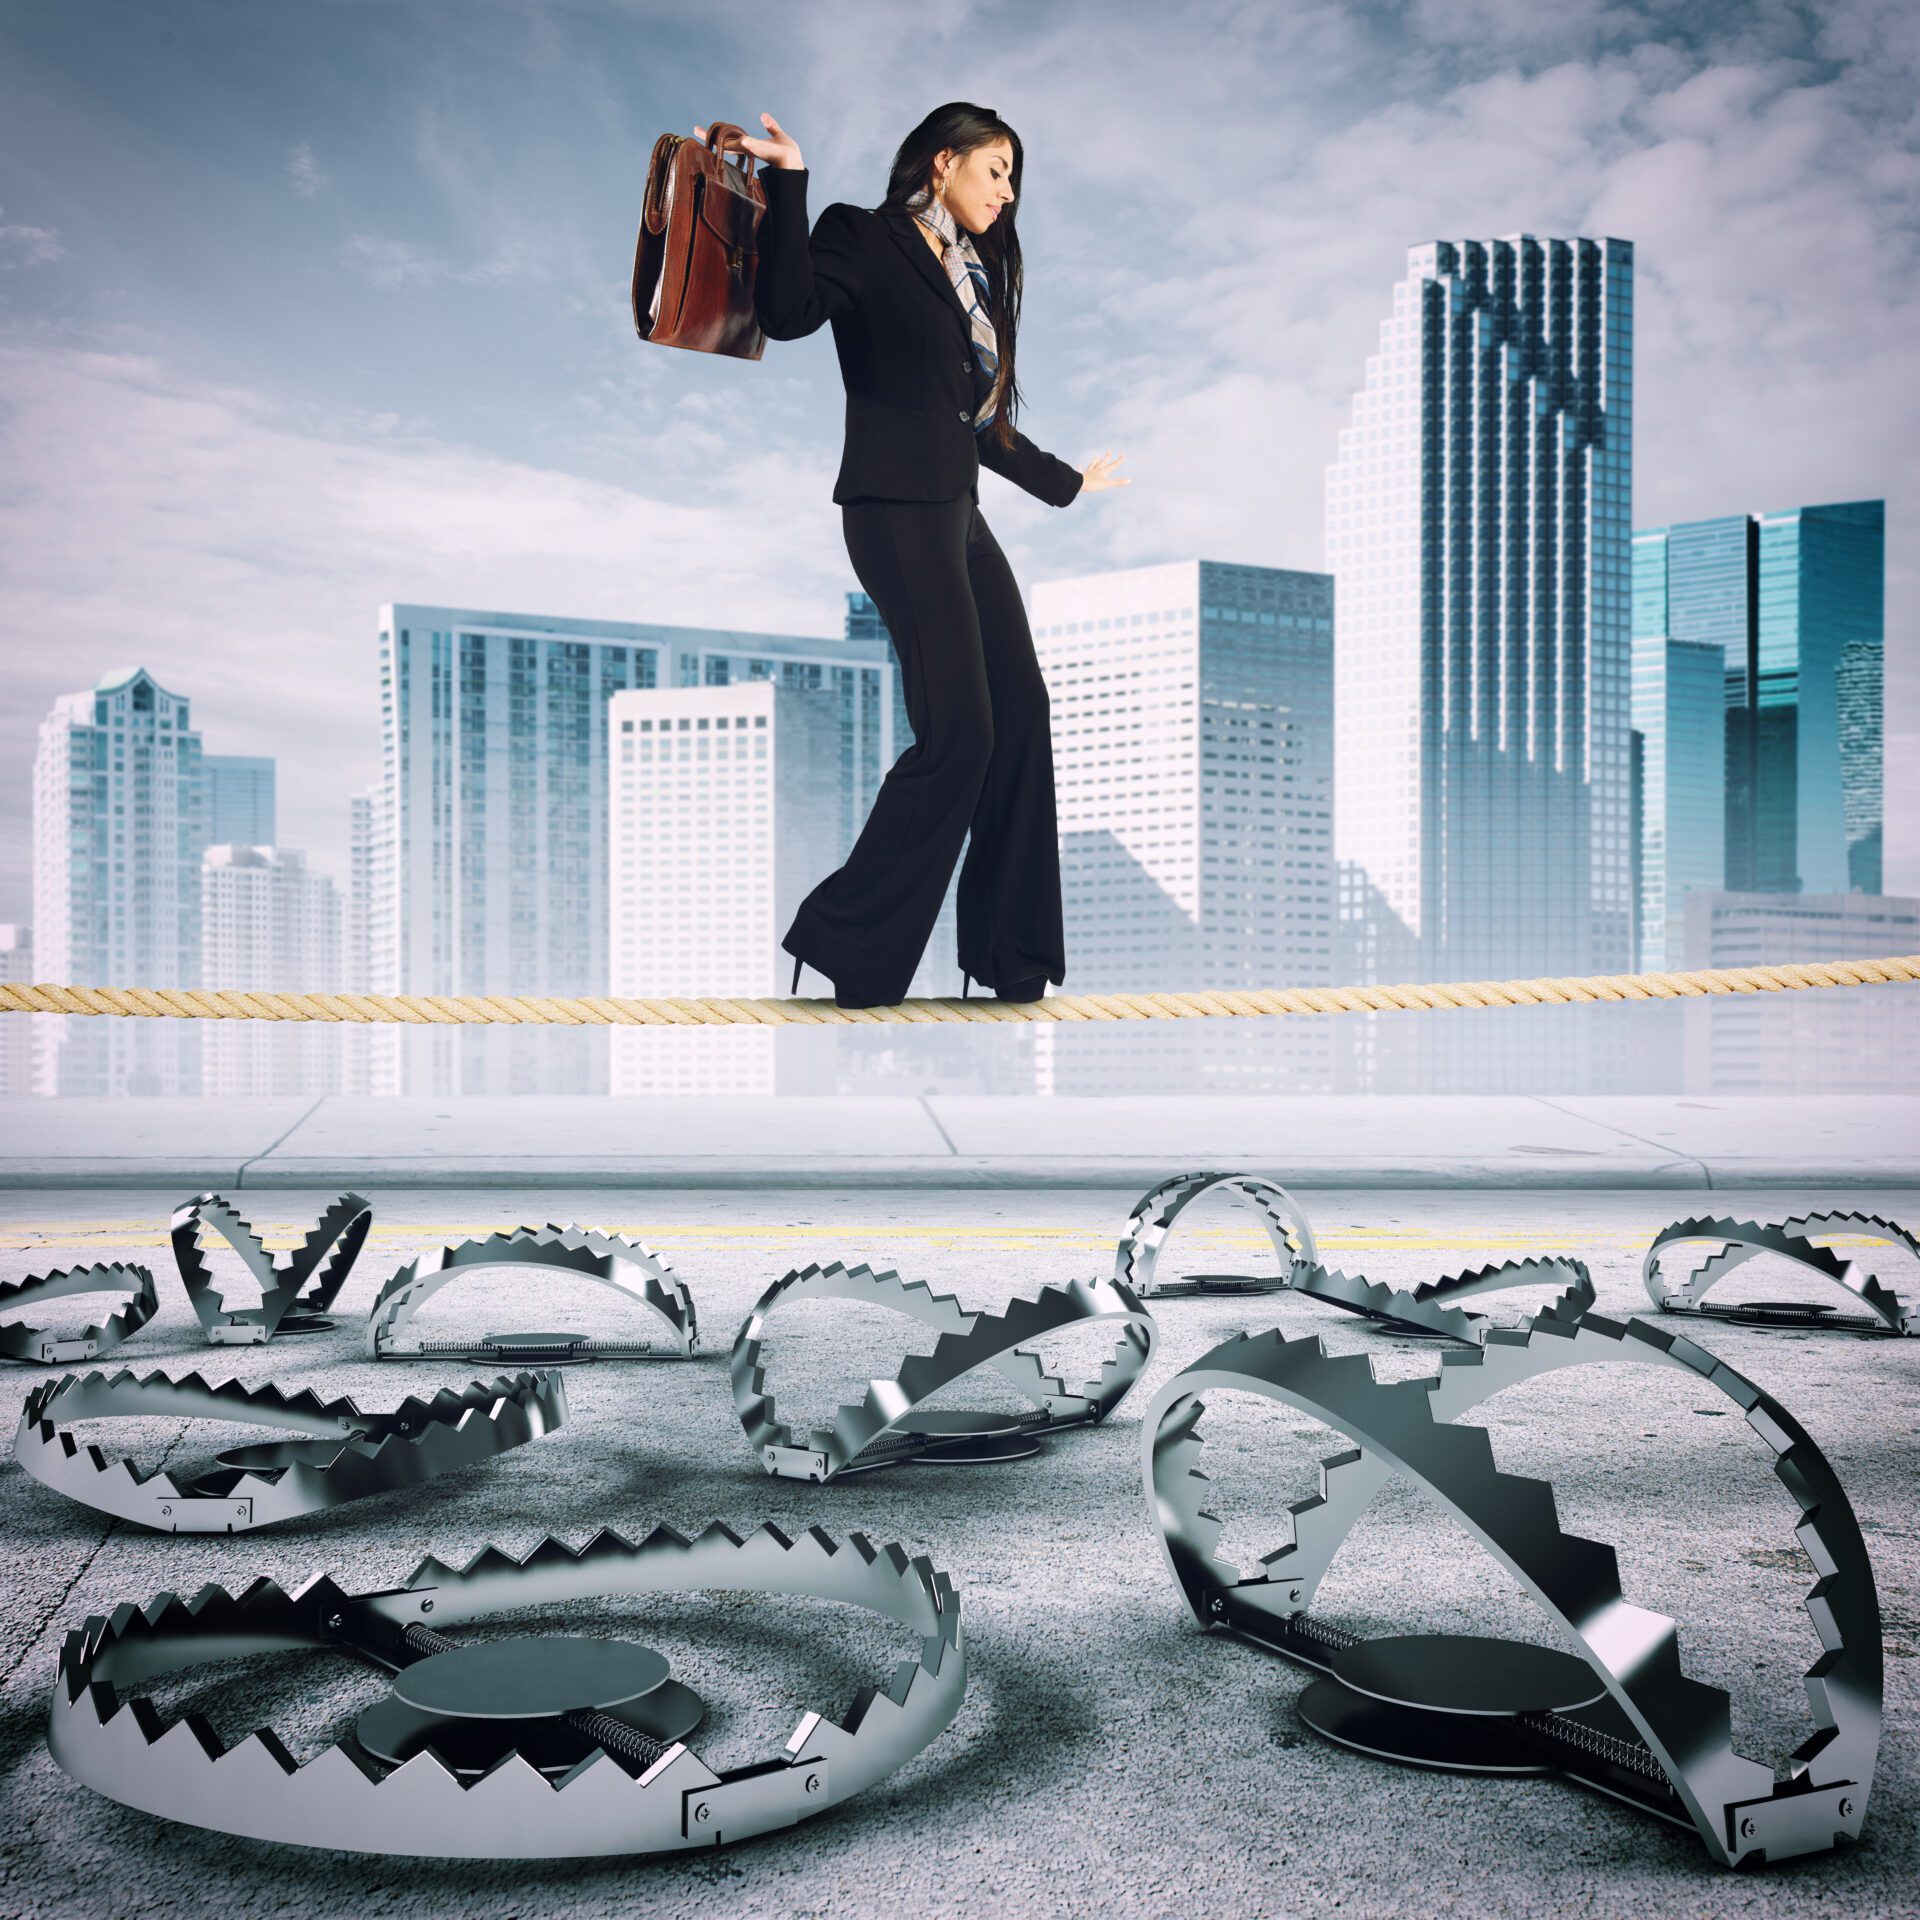 A woman in business atire with a briefcase walks on a yellow tight rope over silver bear claw traps with city skyscrapers in the background